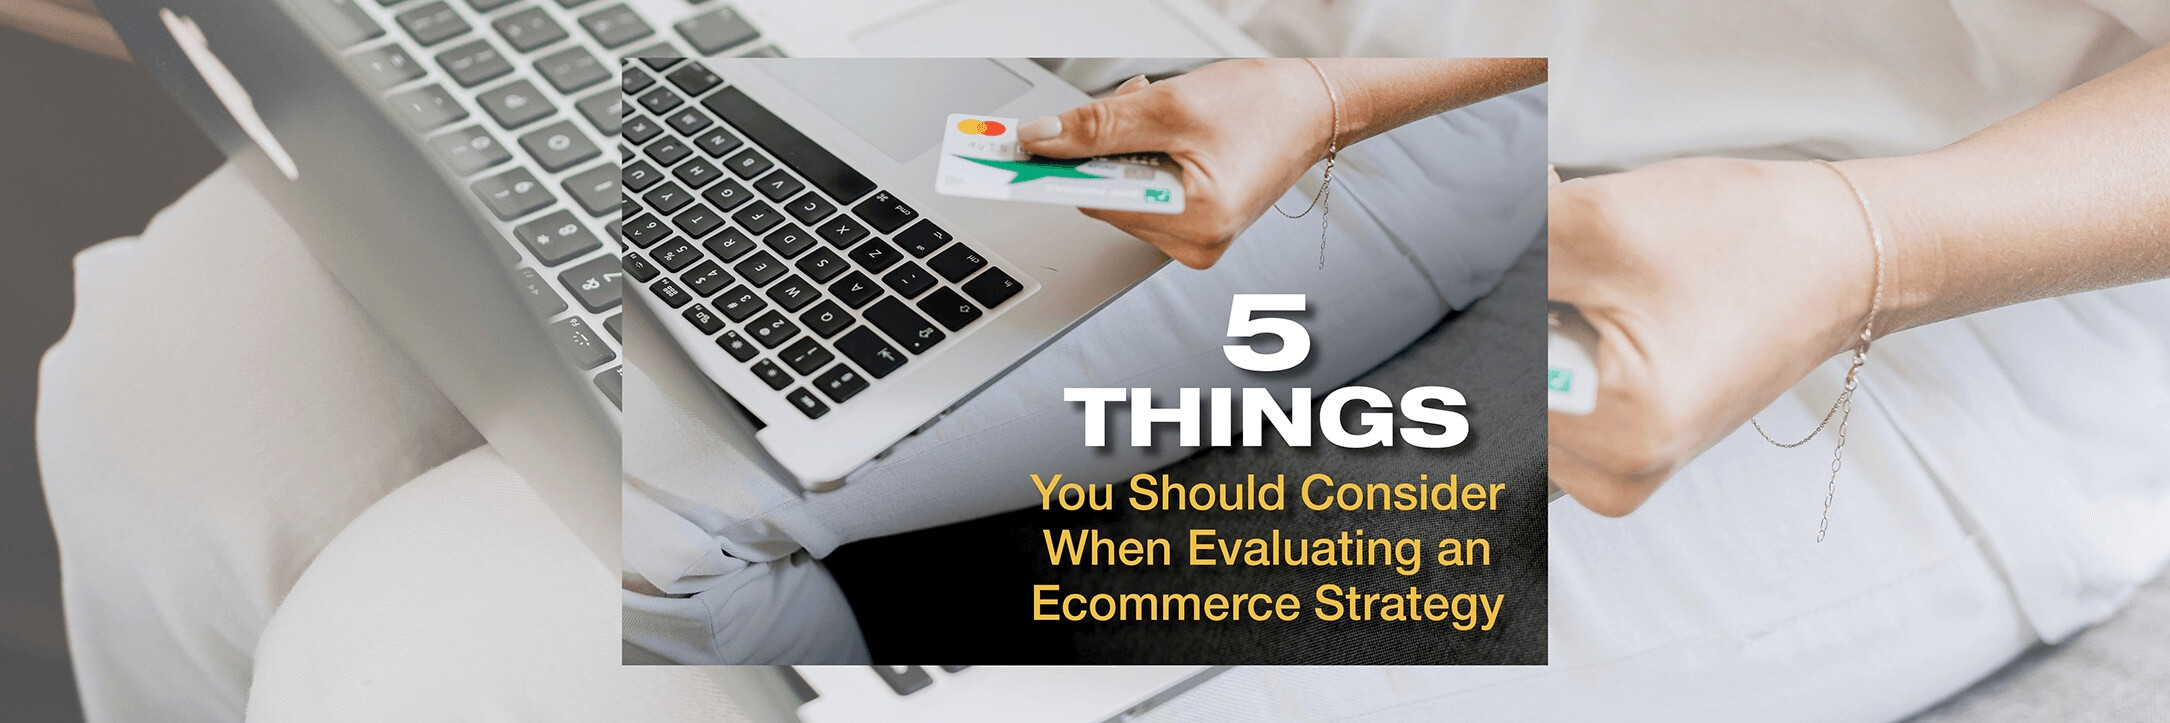 5 Things You Should Consider When Evaluating an Ecommerce Strategy